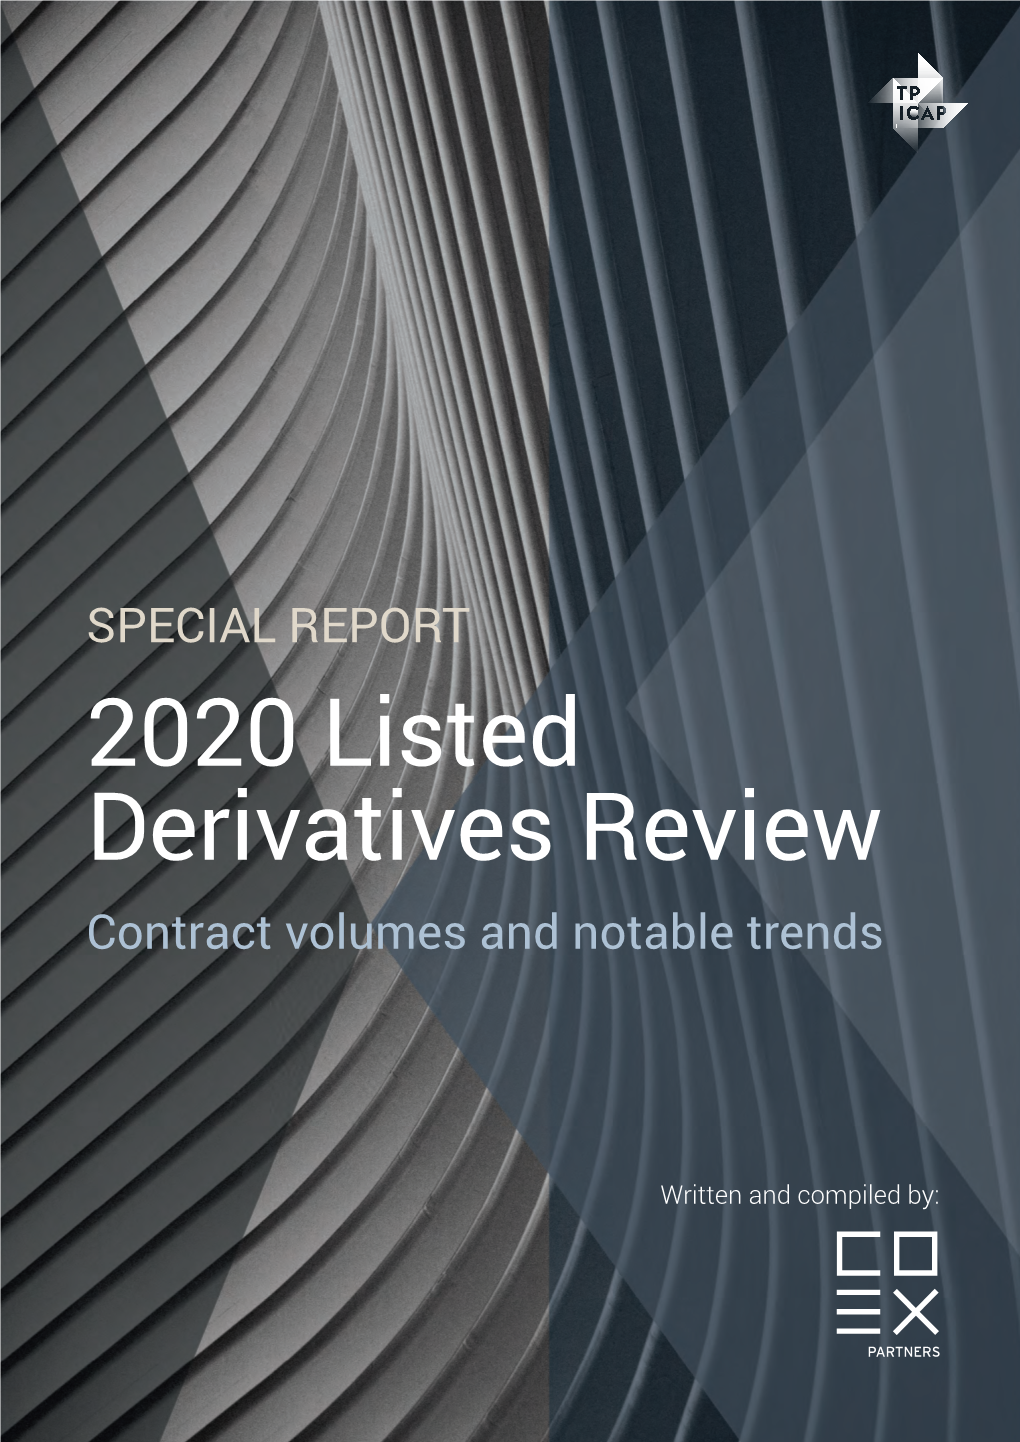 SPECIAL REPORT 2020 Listed Derivatives Review Contract Volumes and Notable Trends